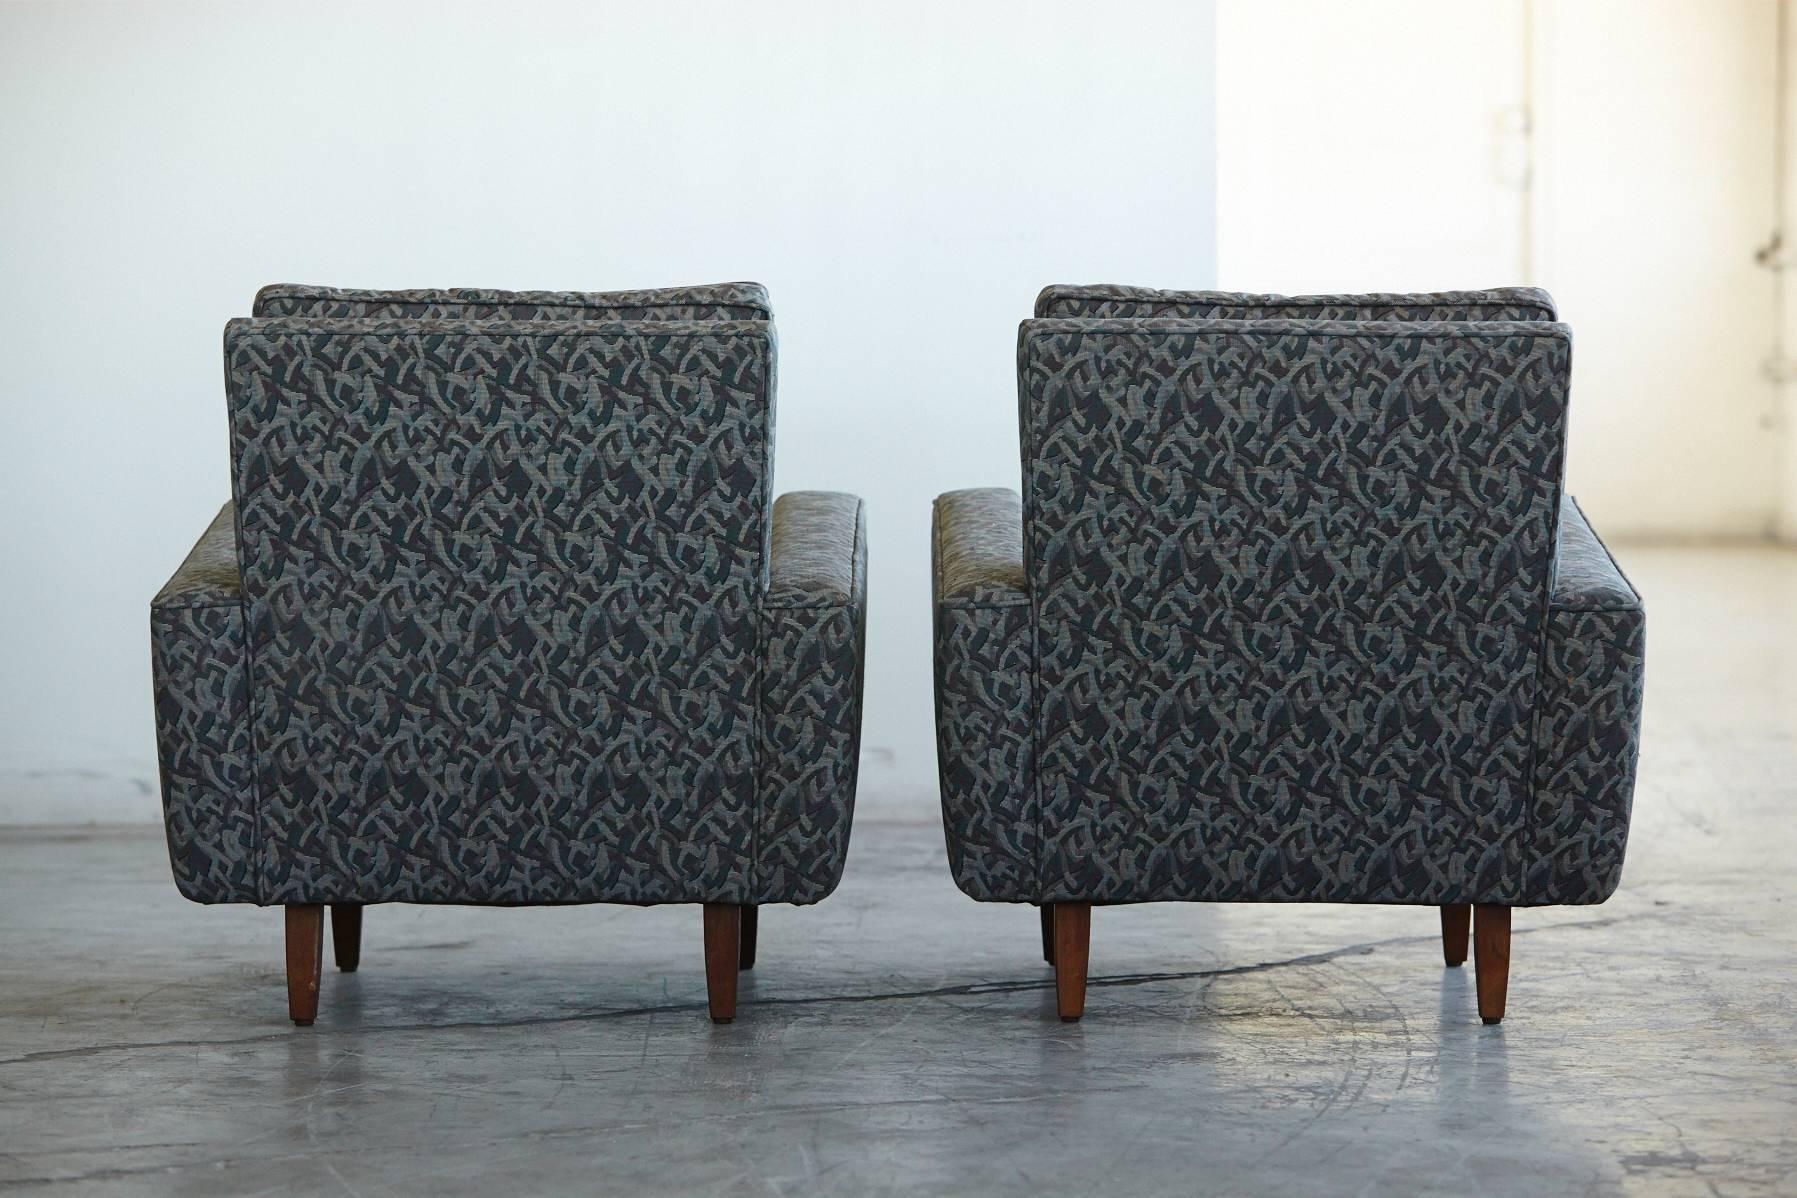 Oiled Pair of Early Florence Knoll Lounge Chairs from 1967, Reupholstered in the 1980s